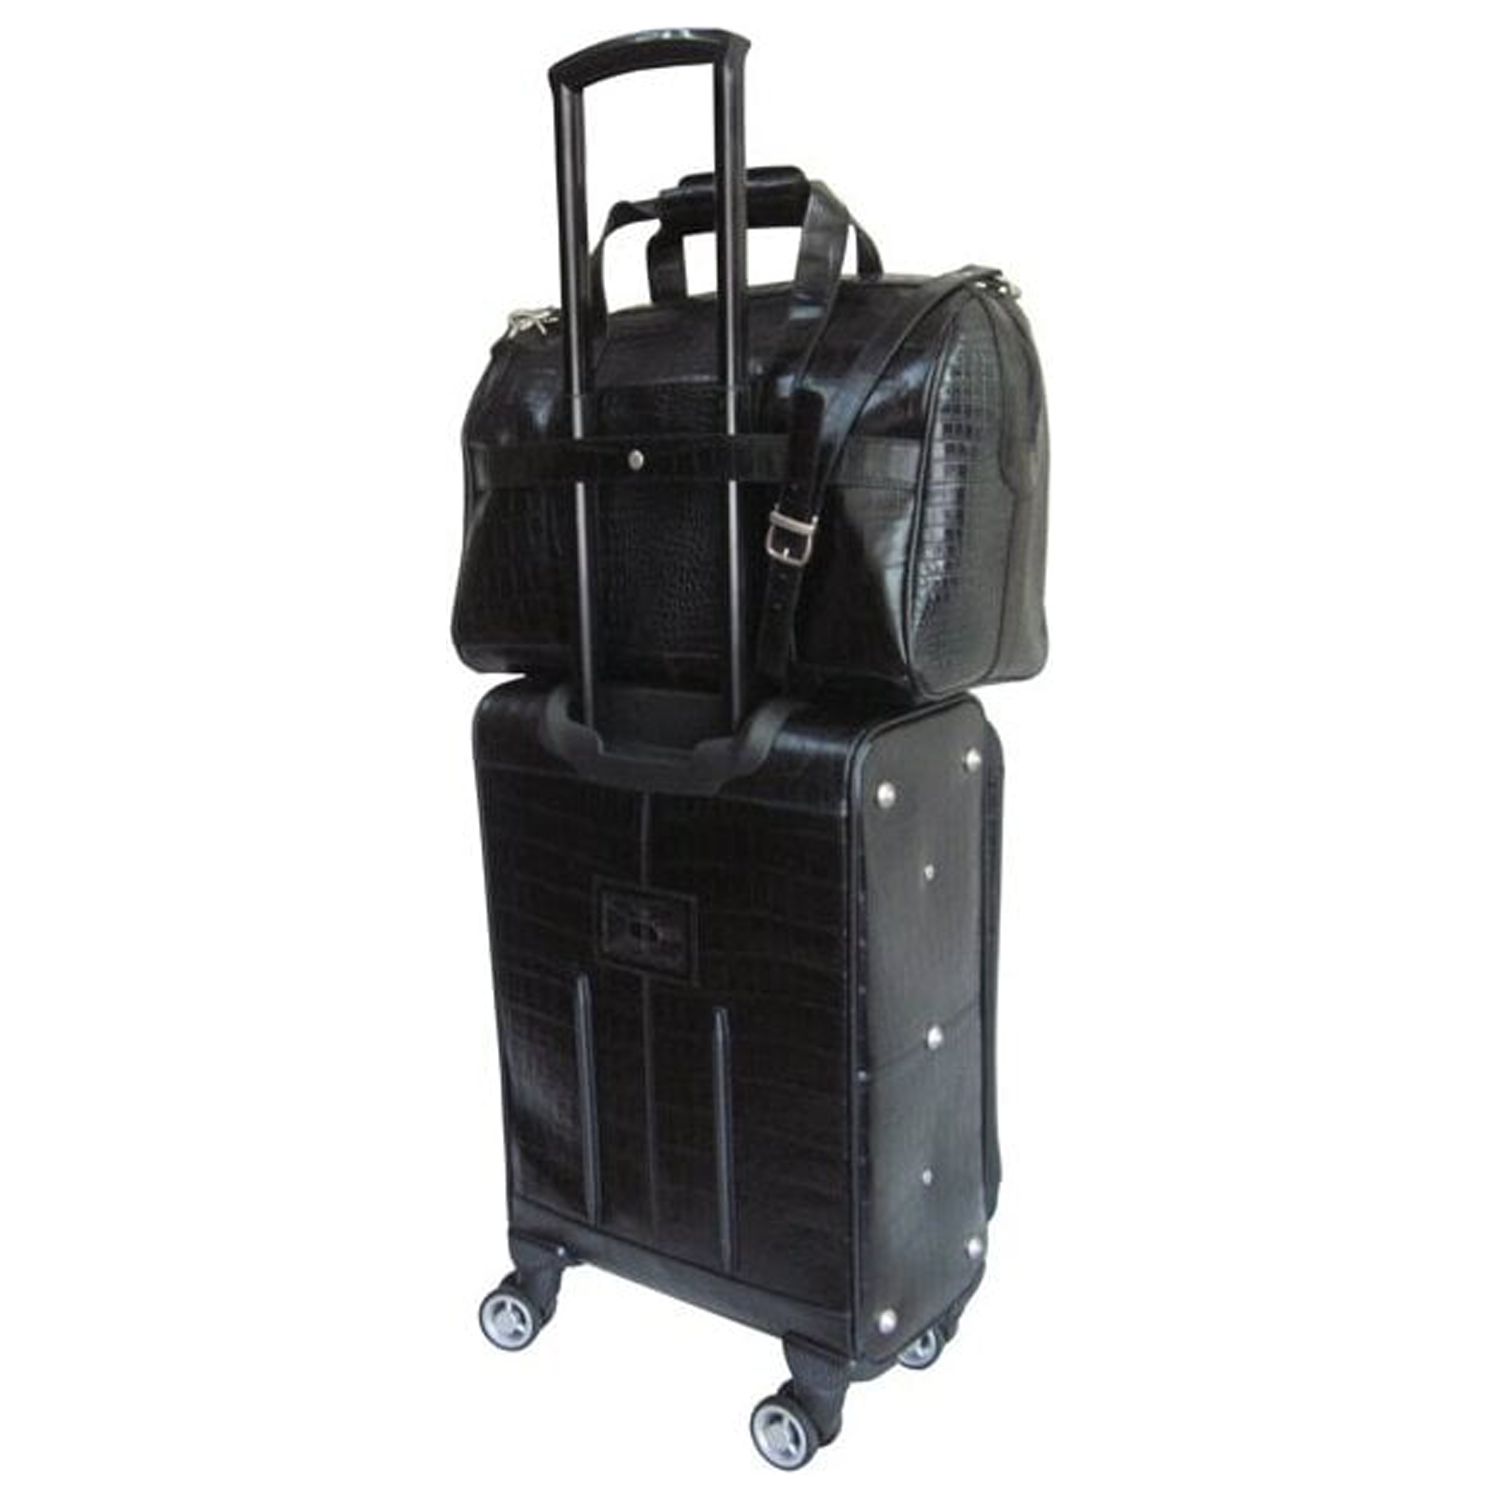 Black Leather Croco-Print 2-Piece Carry-On Spinner Luggage Set - image 4 of 4